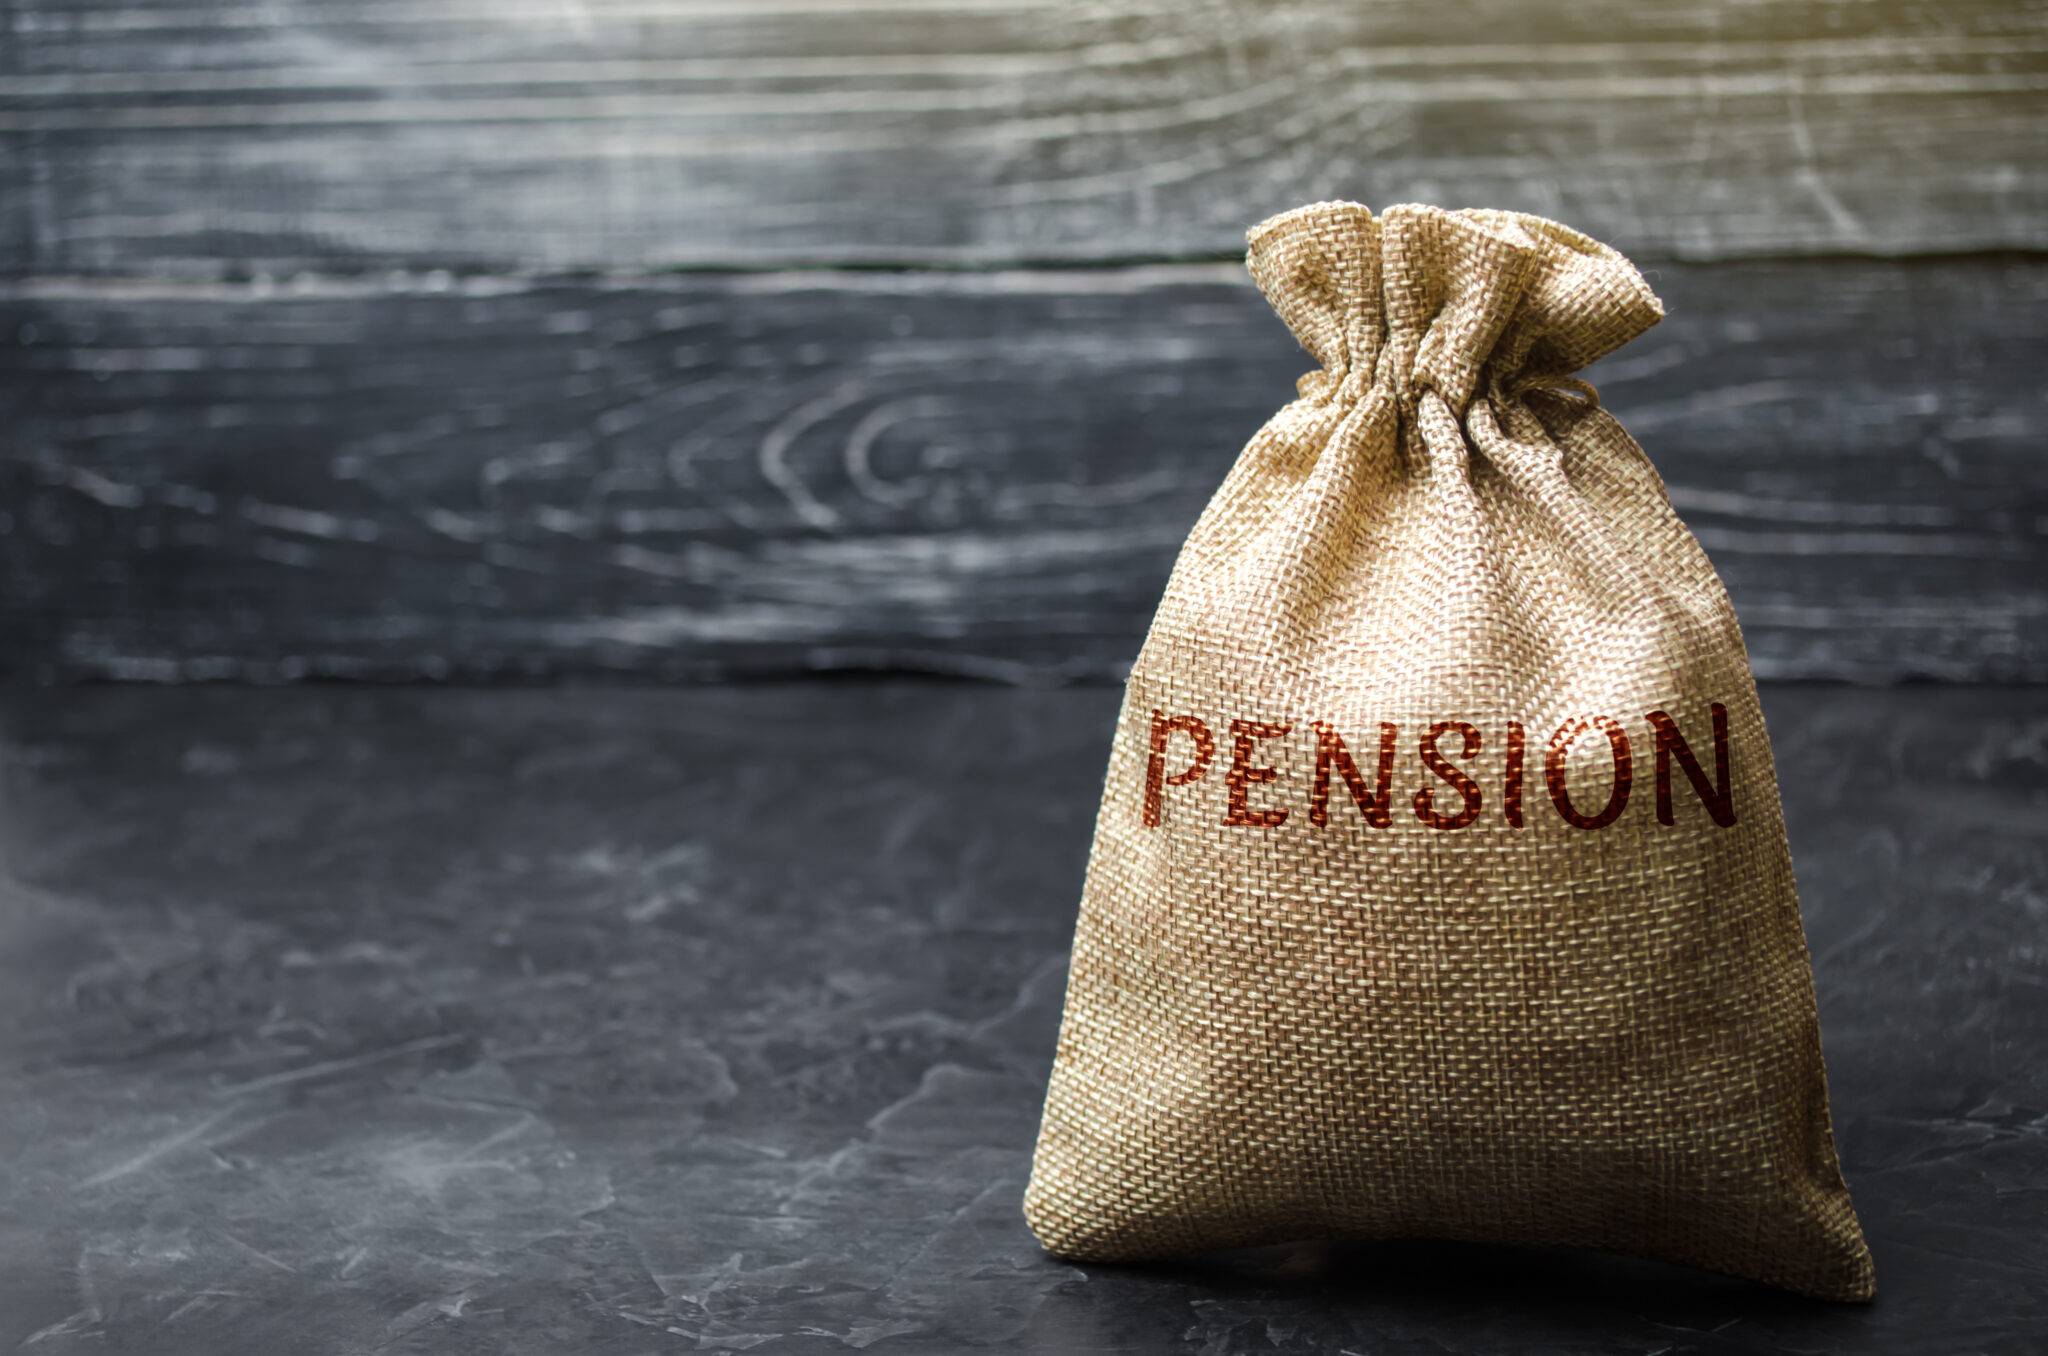 Flat Rate Tax Relief On Pension Contributions